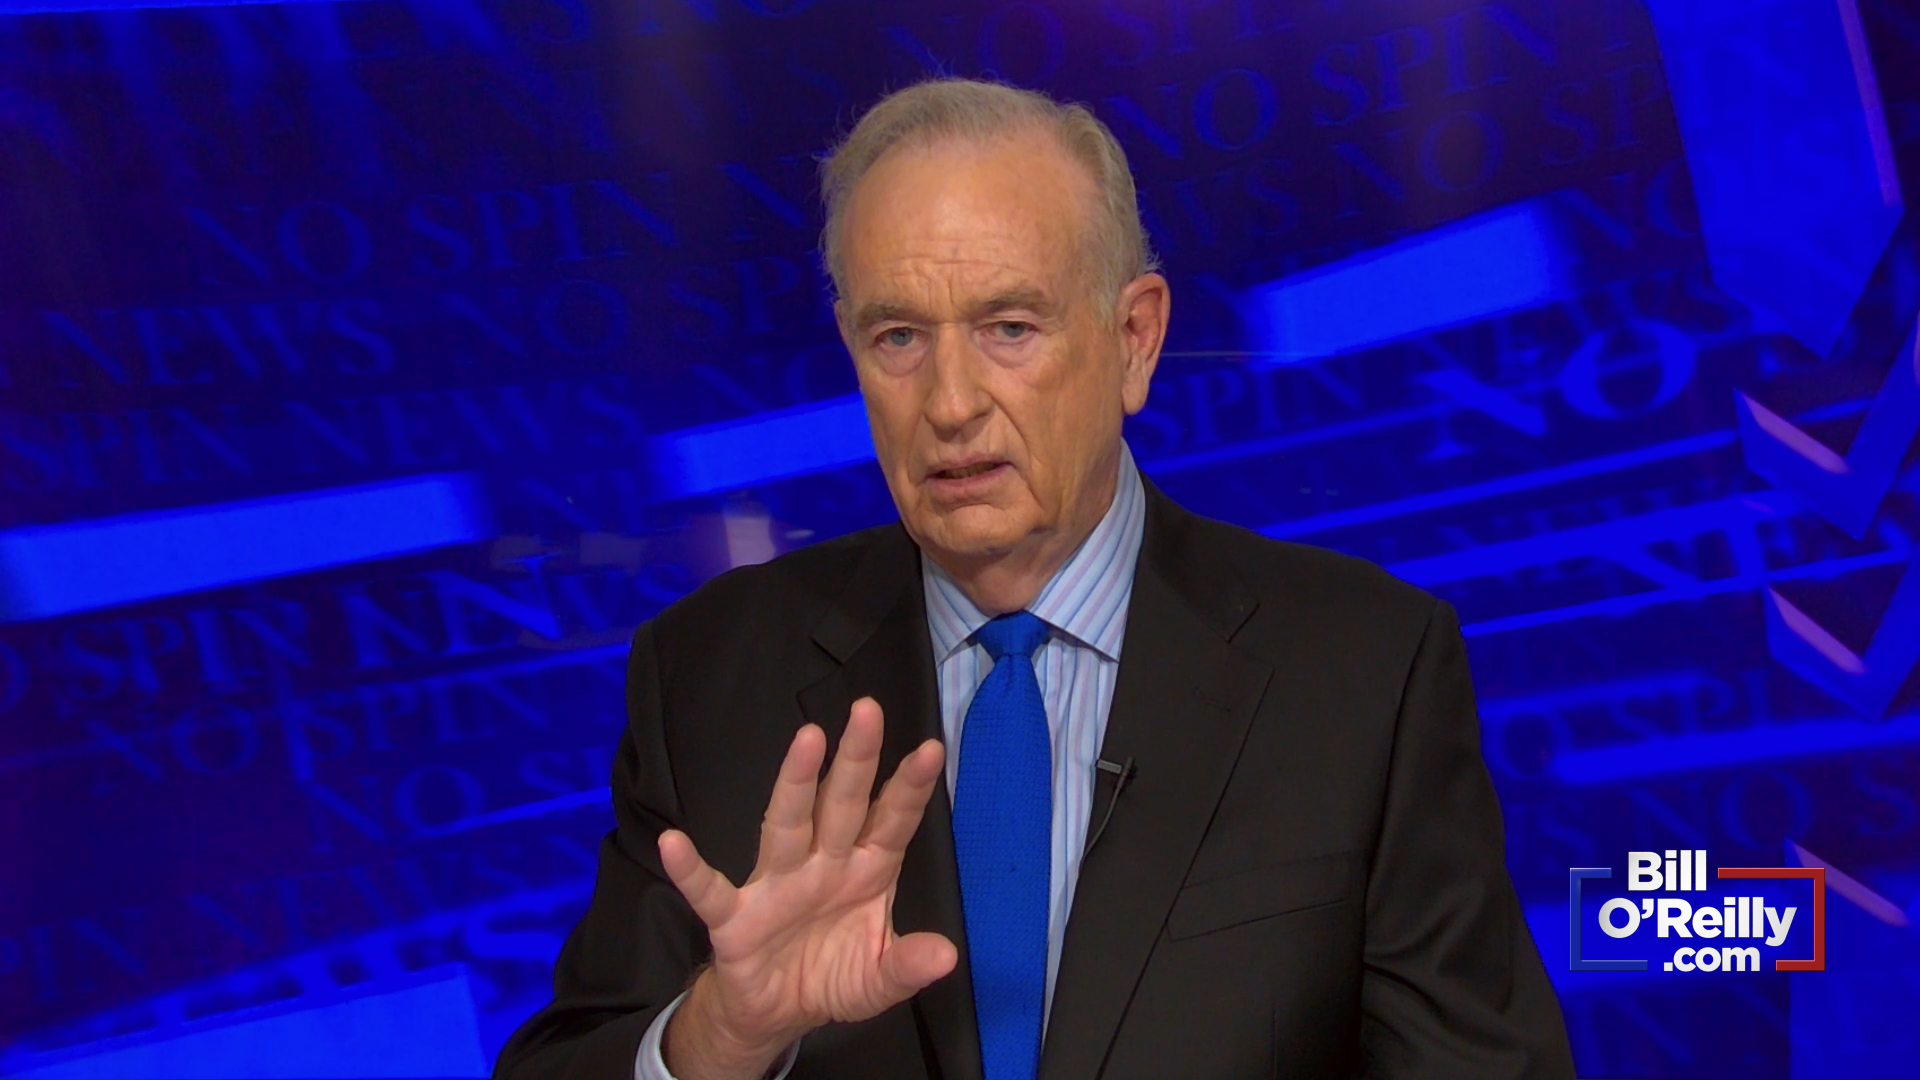 O'Reilly: 'This is Watergate Redux'